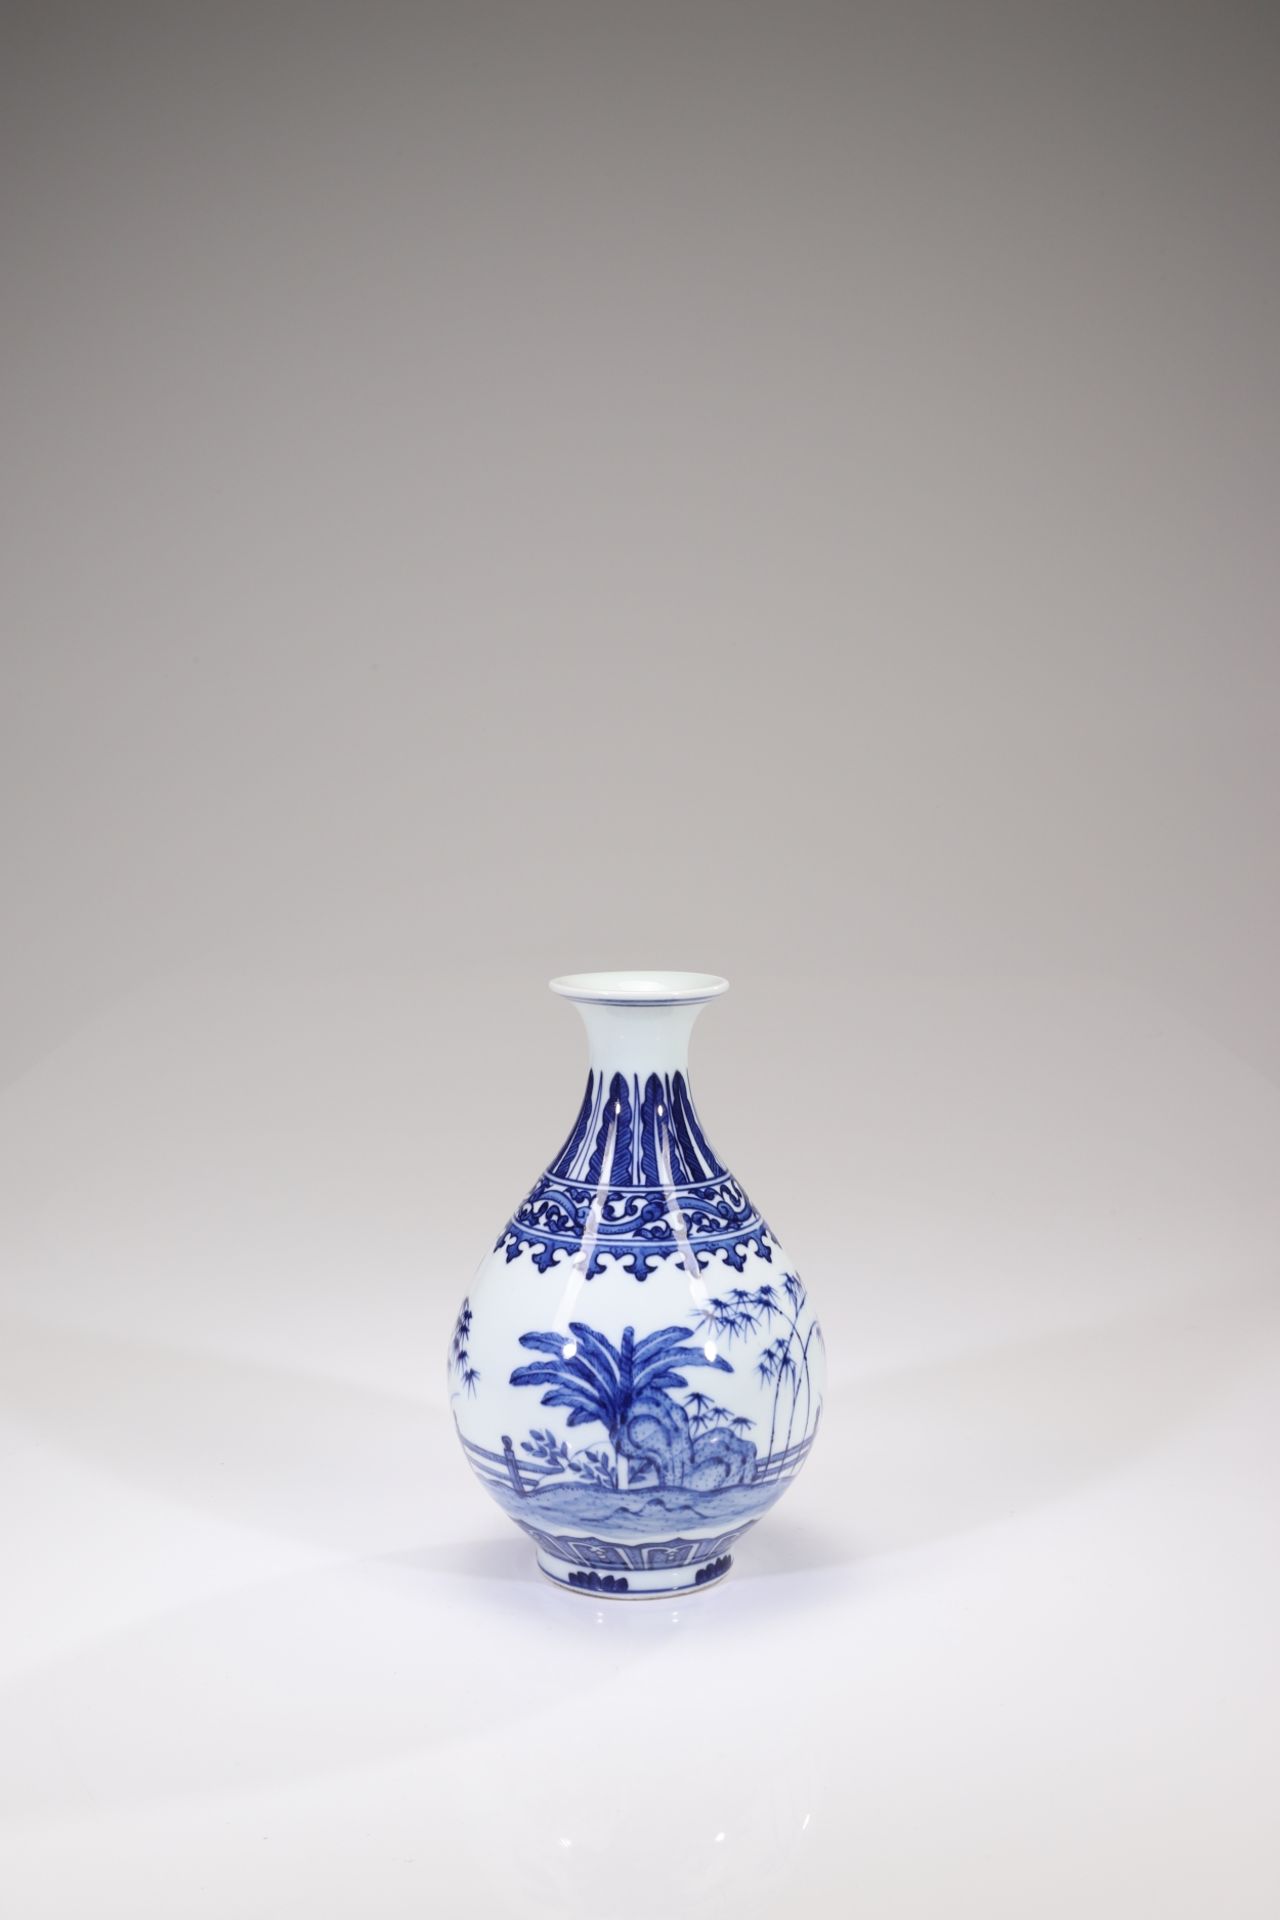 A BLUE AND WHITE PORCELAIN VASE, YUHUCHUNPING